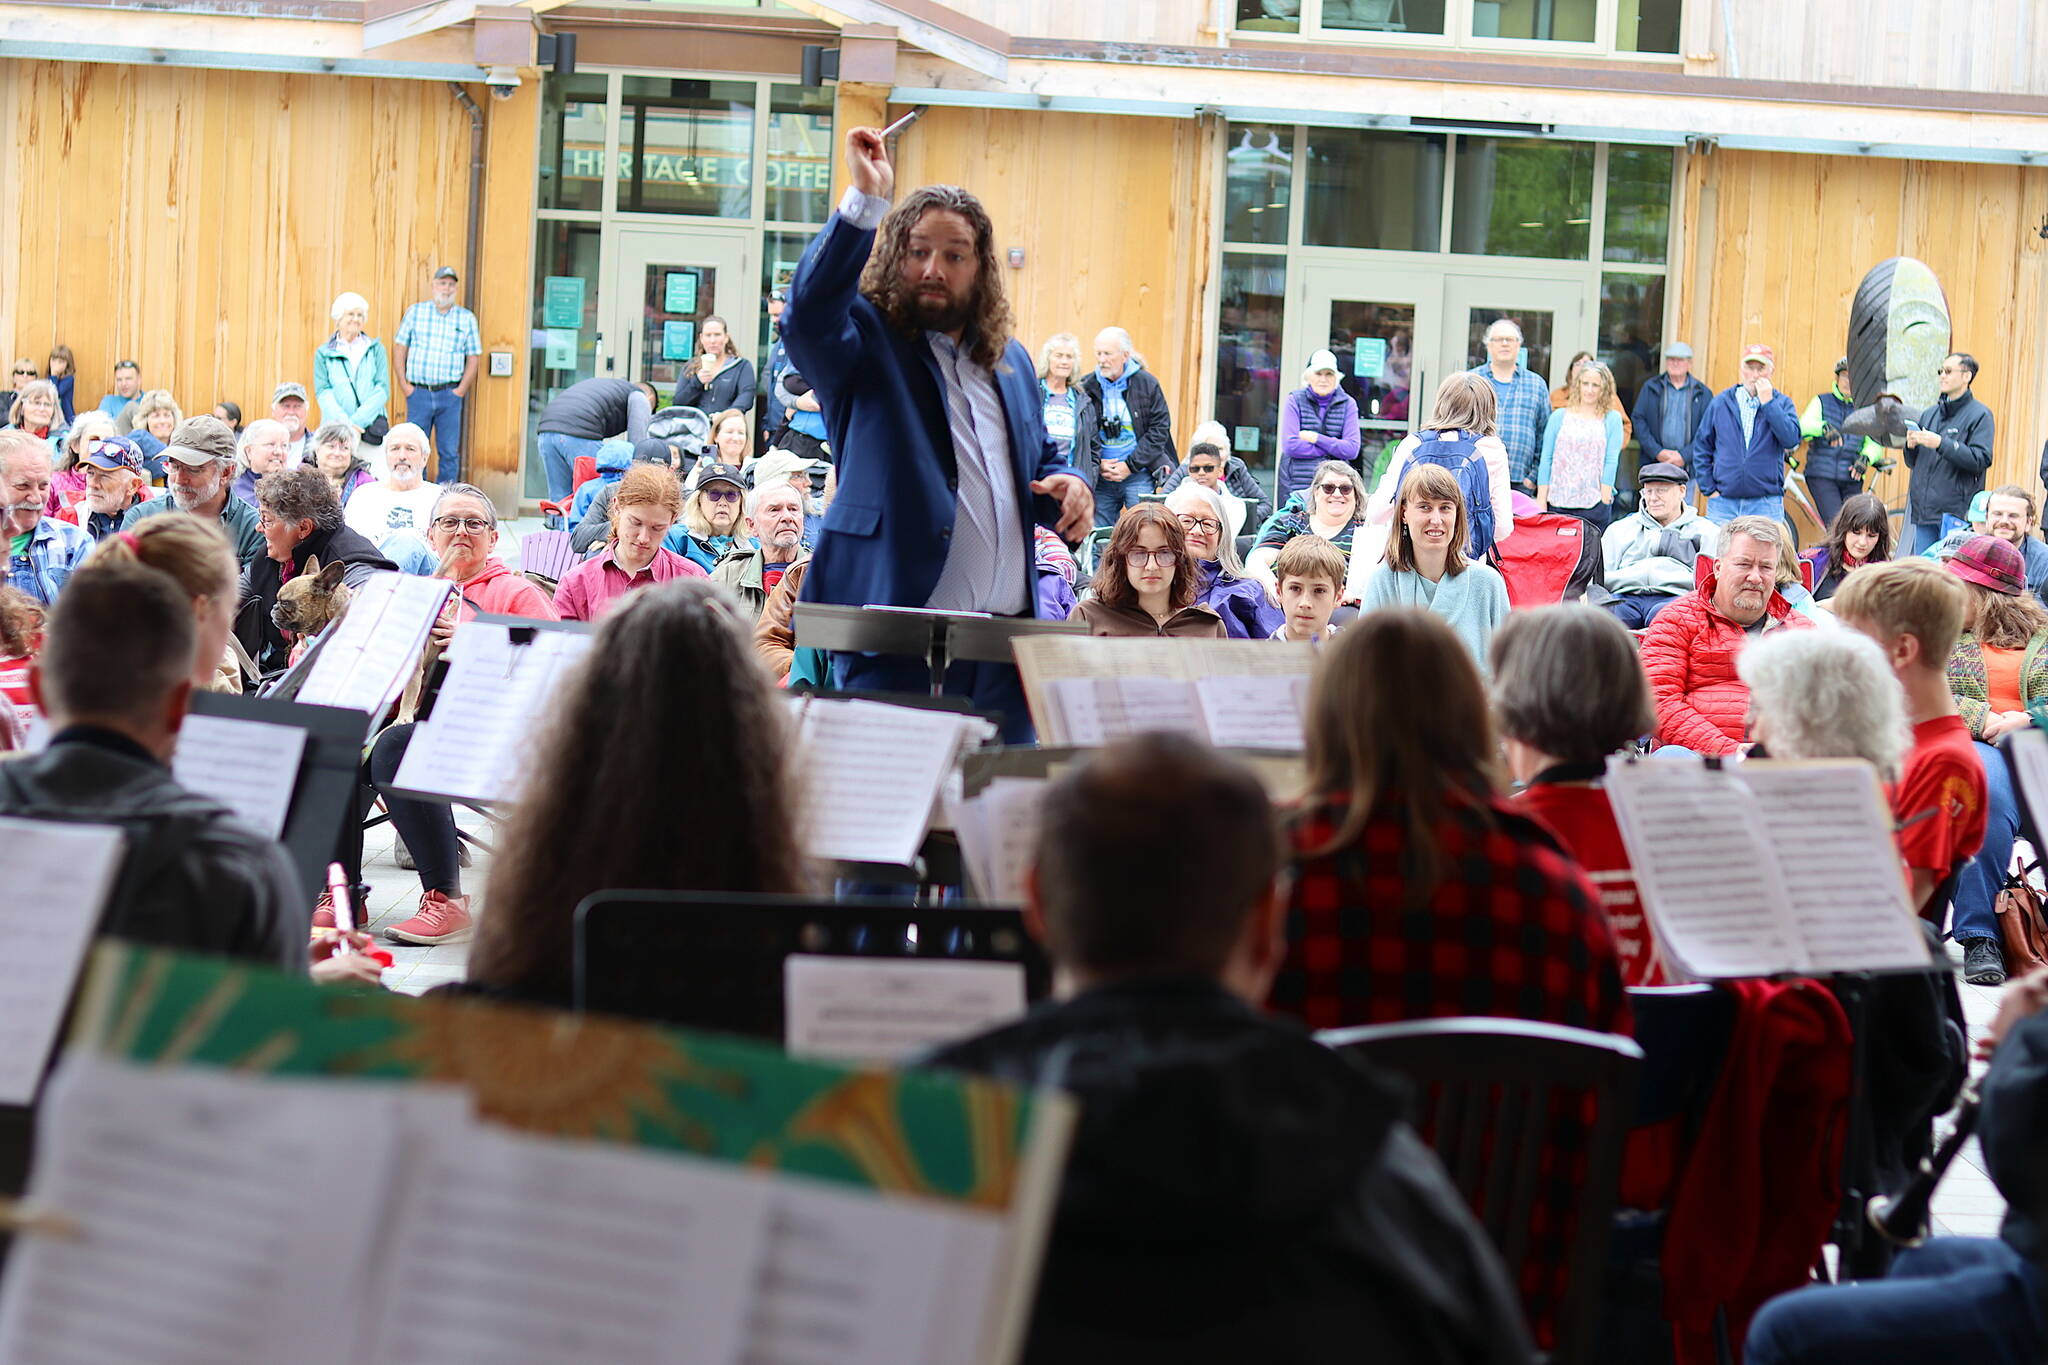 T.J. Hovest conducts the Juneau Volunteer Marching Band during an Independence Day weekend concert on Sunday at Sealaska Heritage Plaza. (Mark Sabbatini / Juneau Empire)